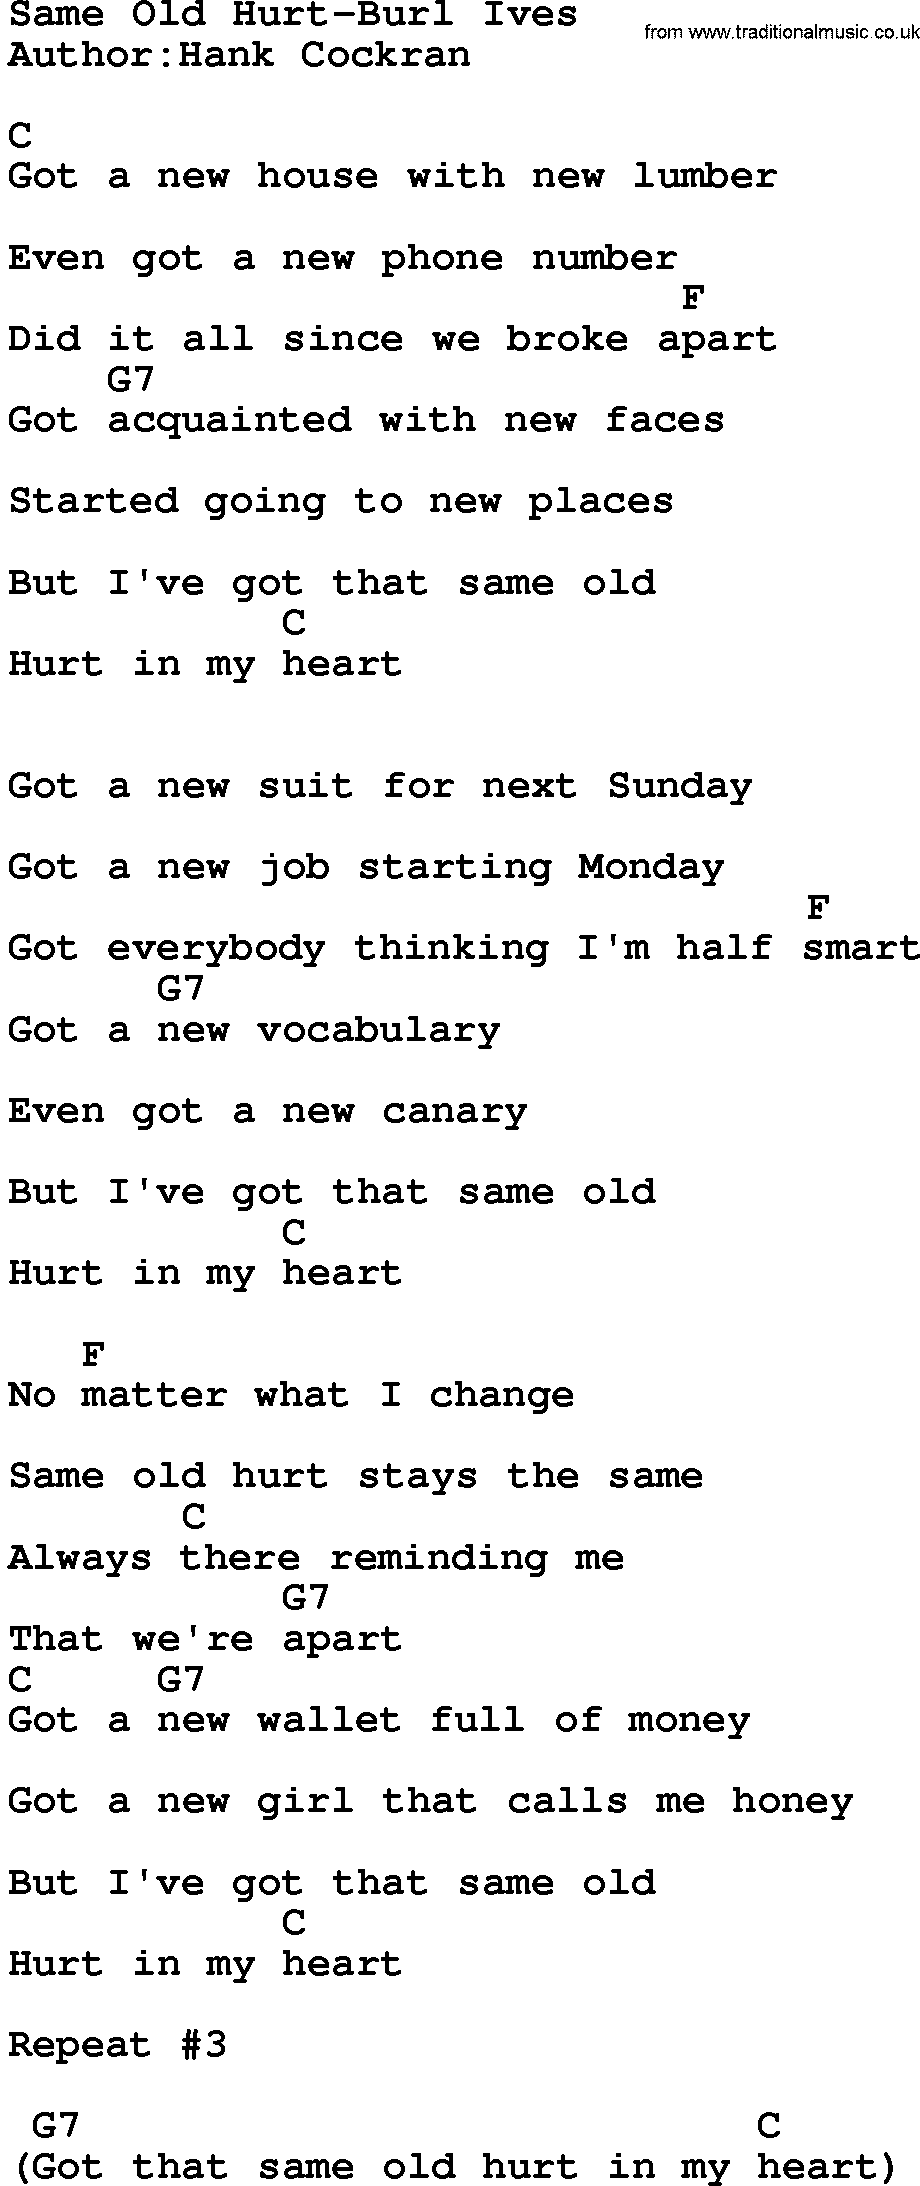 Country music song: Same Old Hurt-Burl Ives lyrics and chords